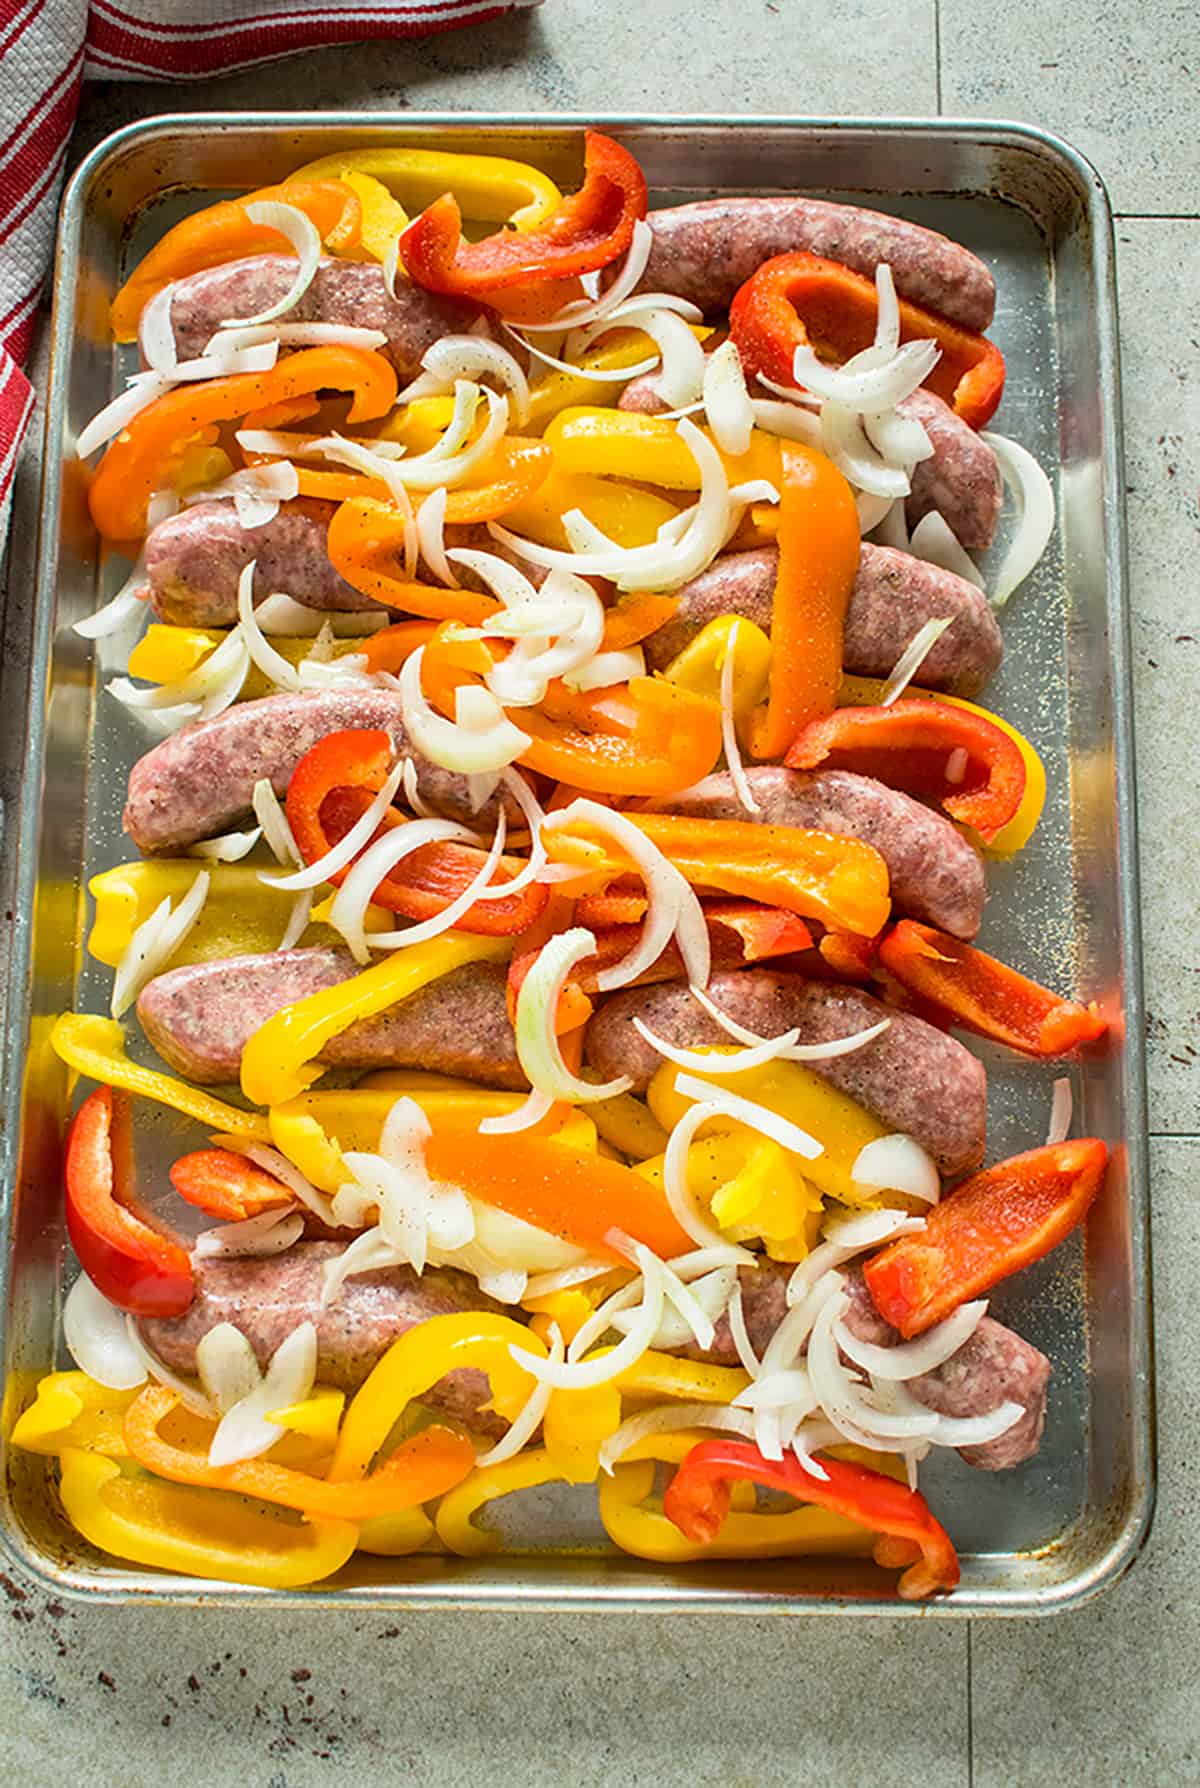 raw sausage links, sliced onions, peppers on sheet pan